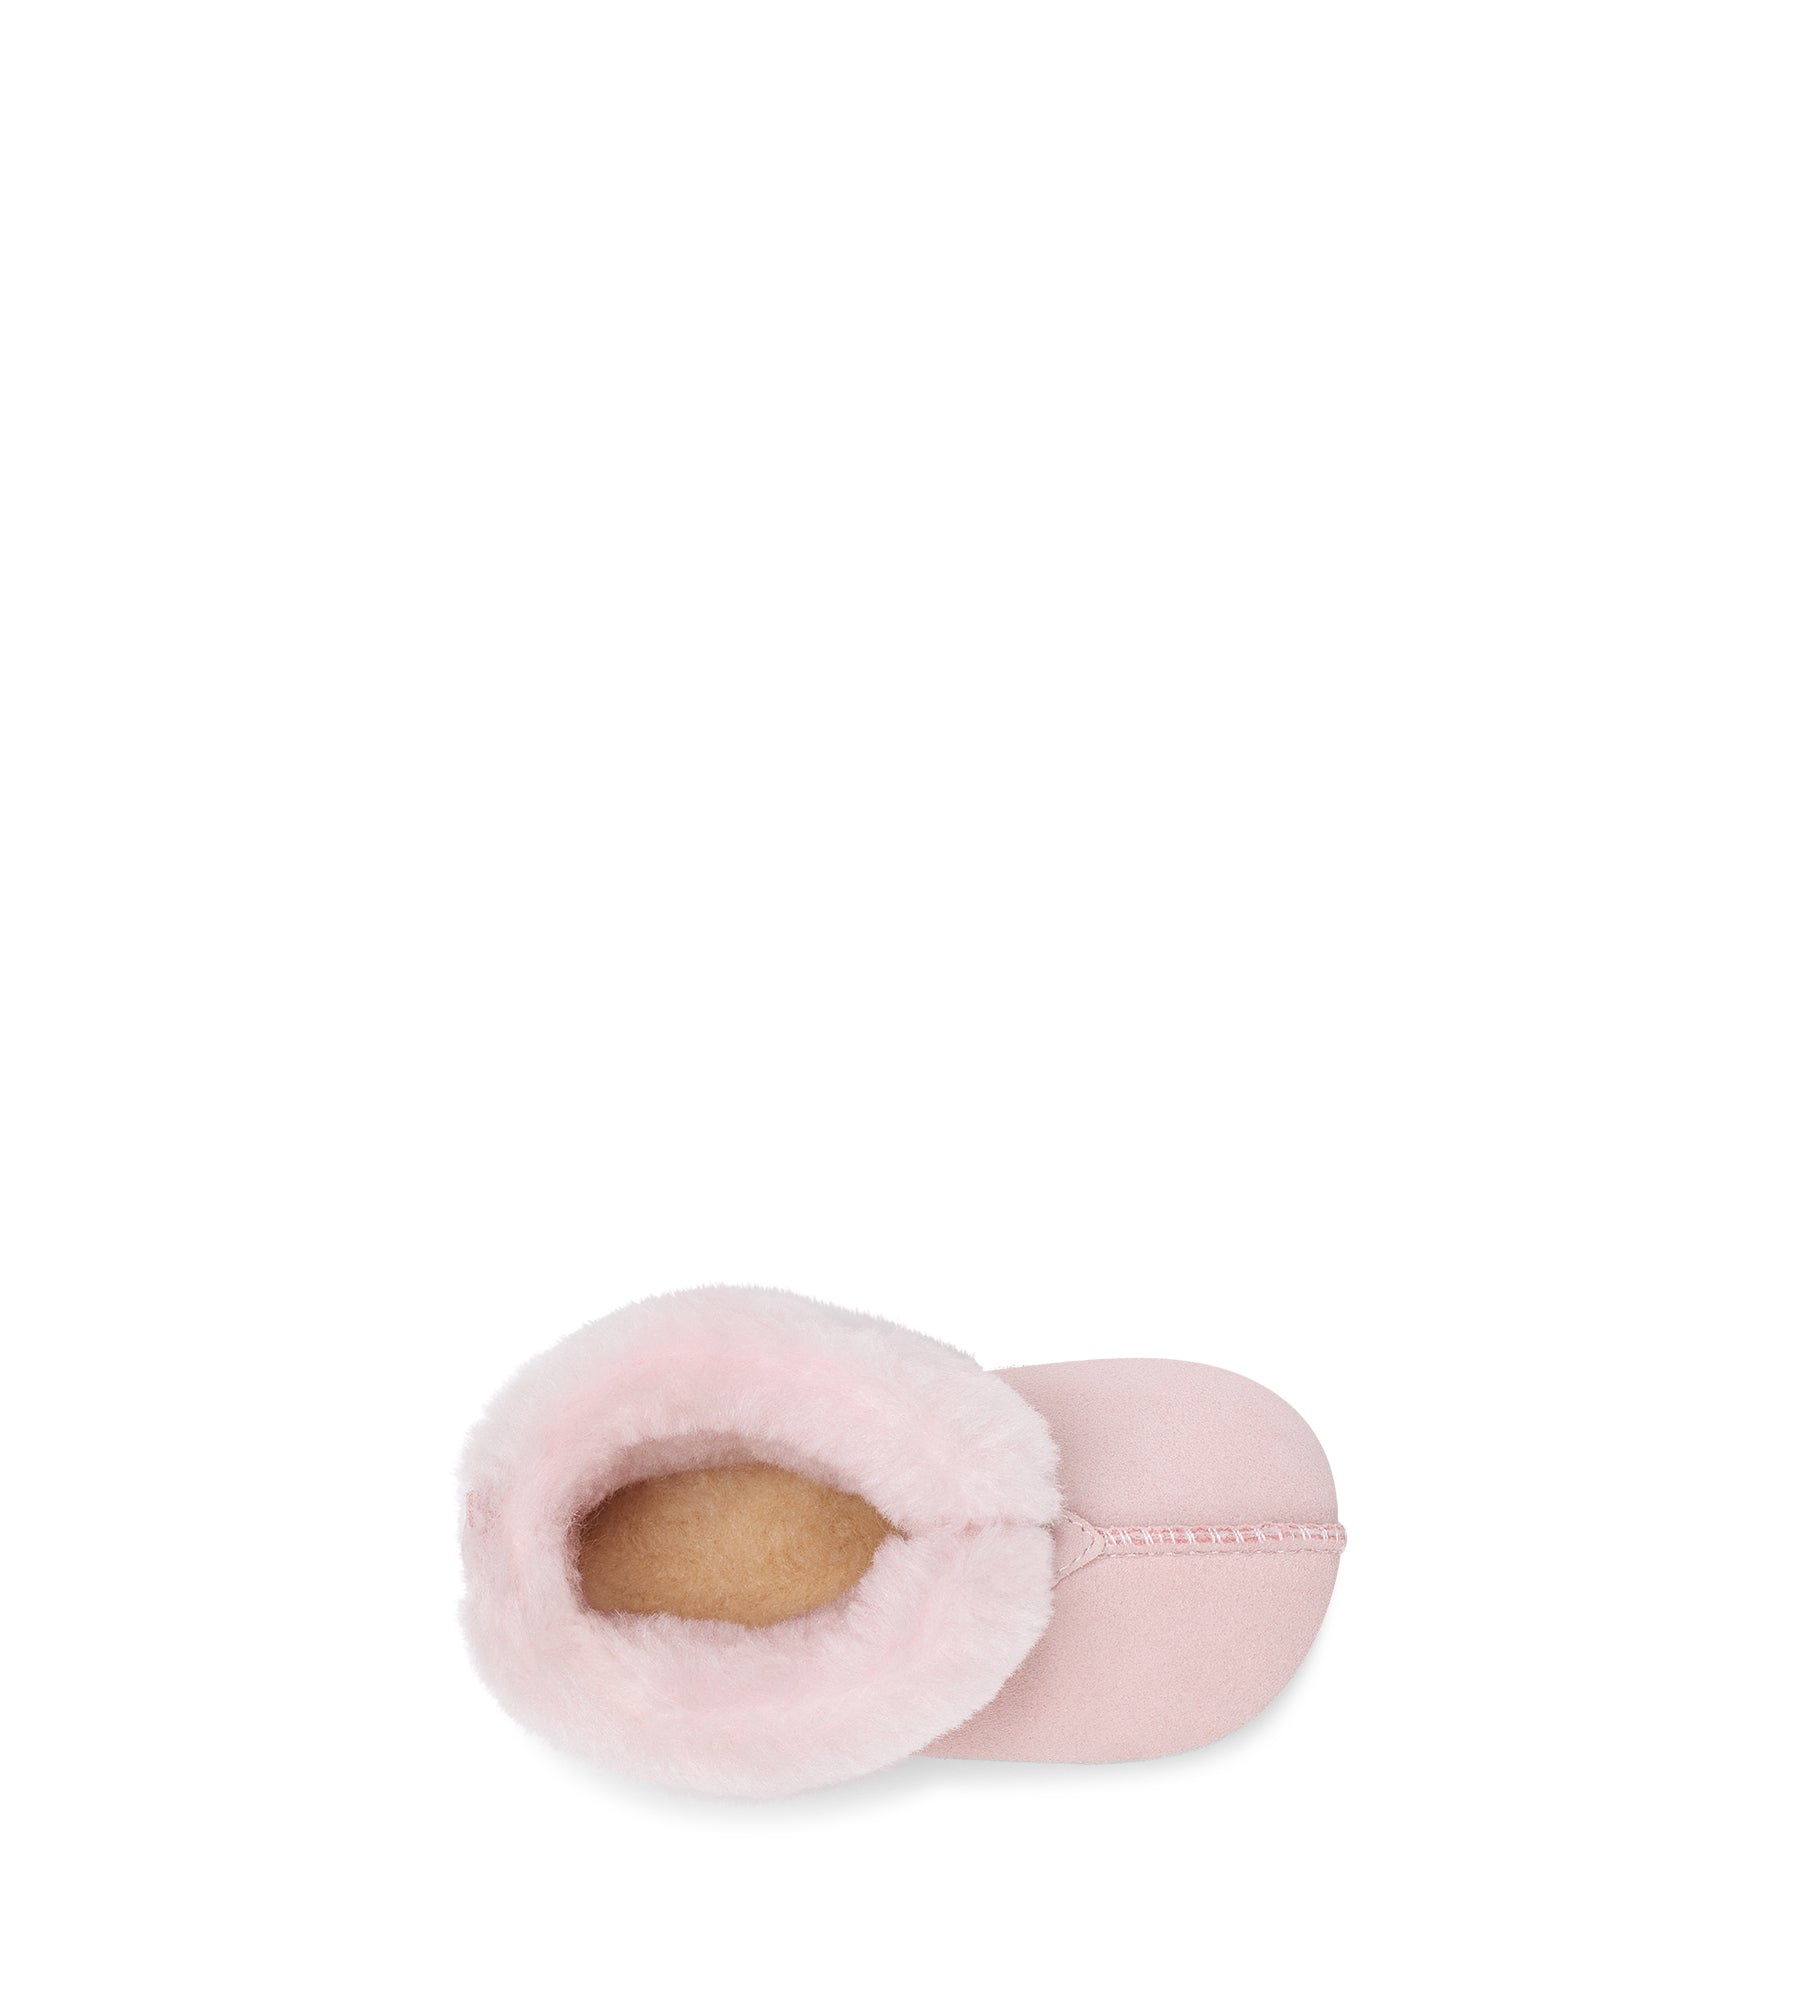 Infant's Gojee Suede